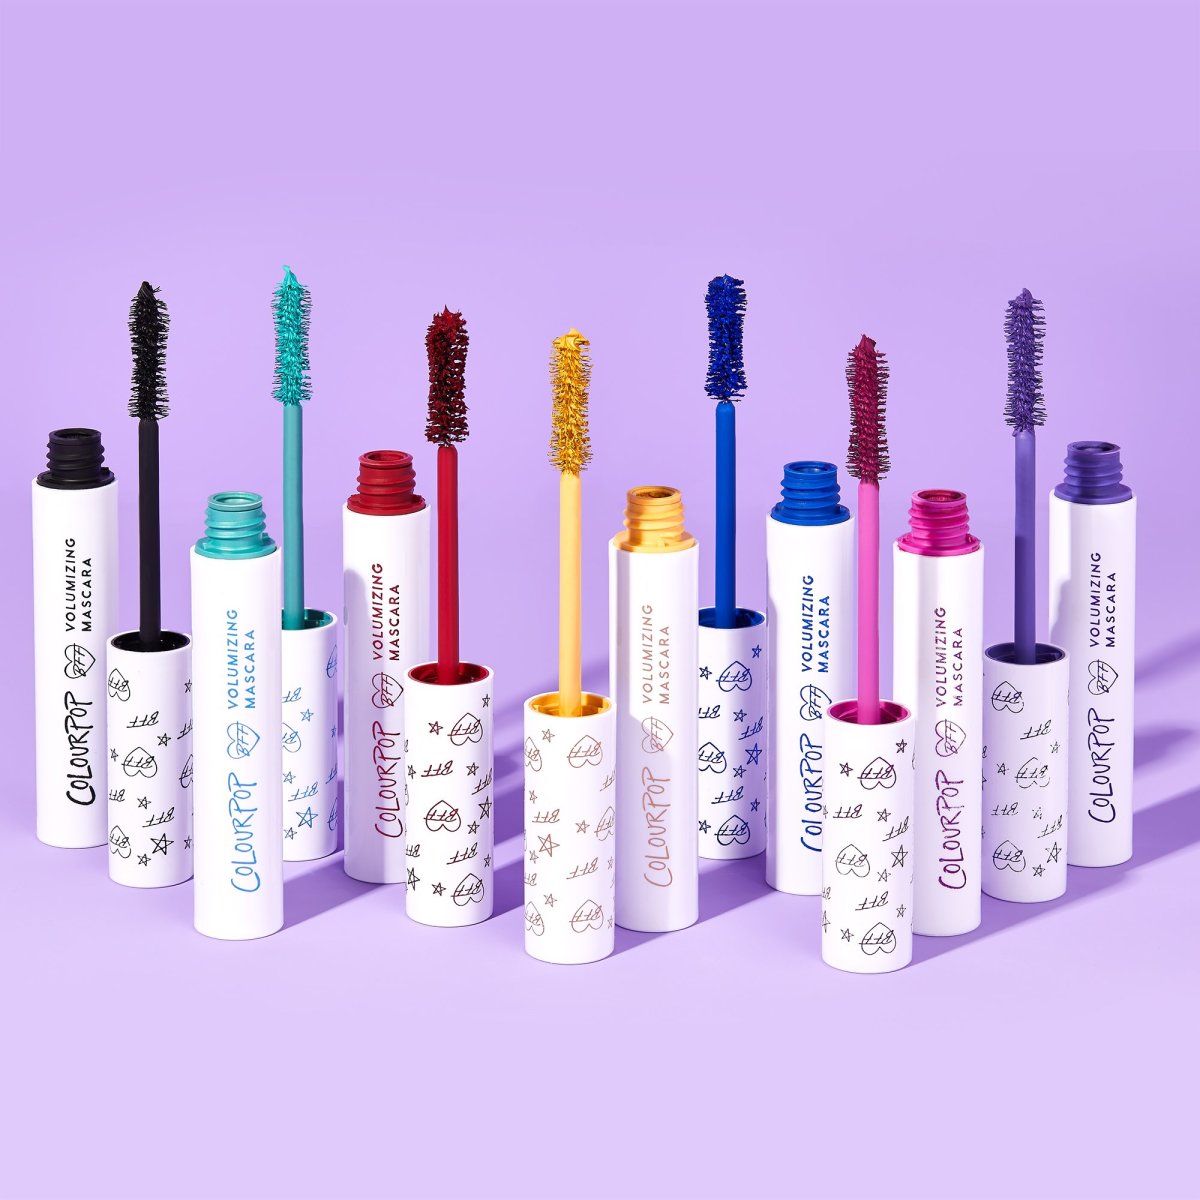 ColourPop’s extensive line of bright candy colored mascaras.